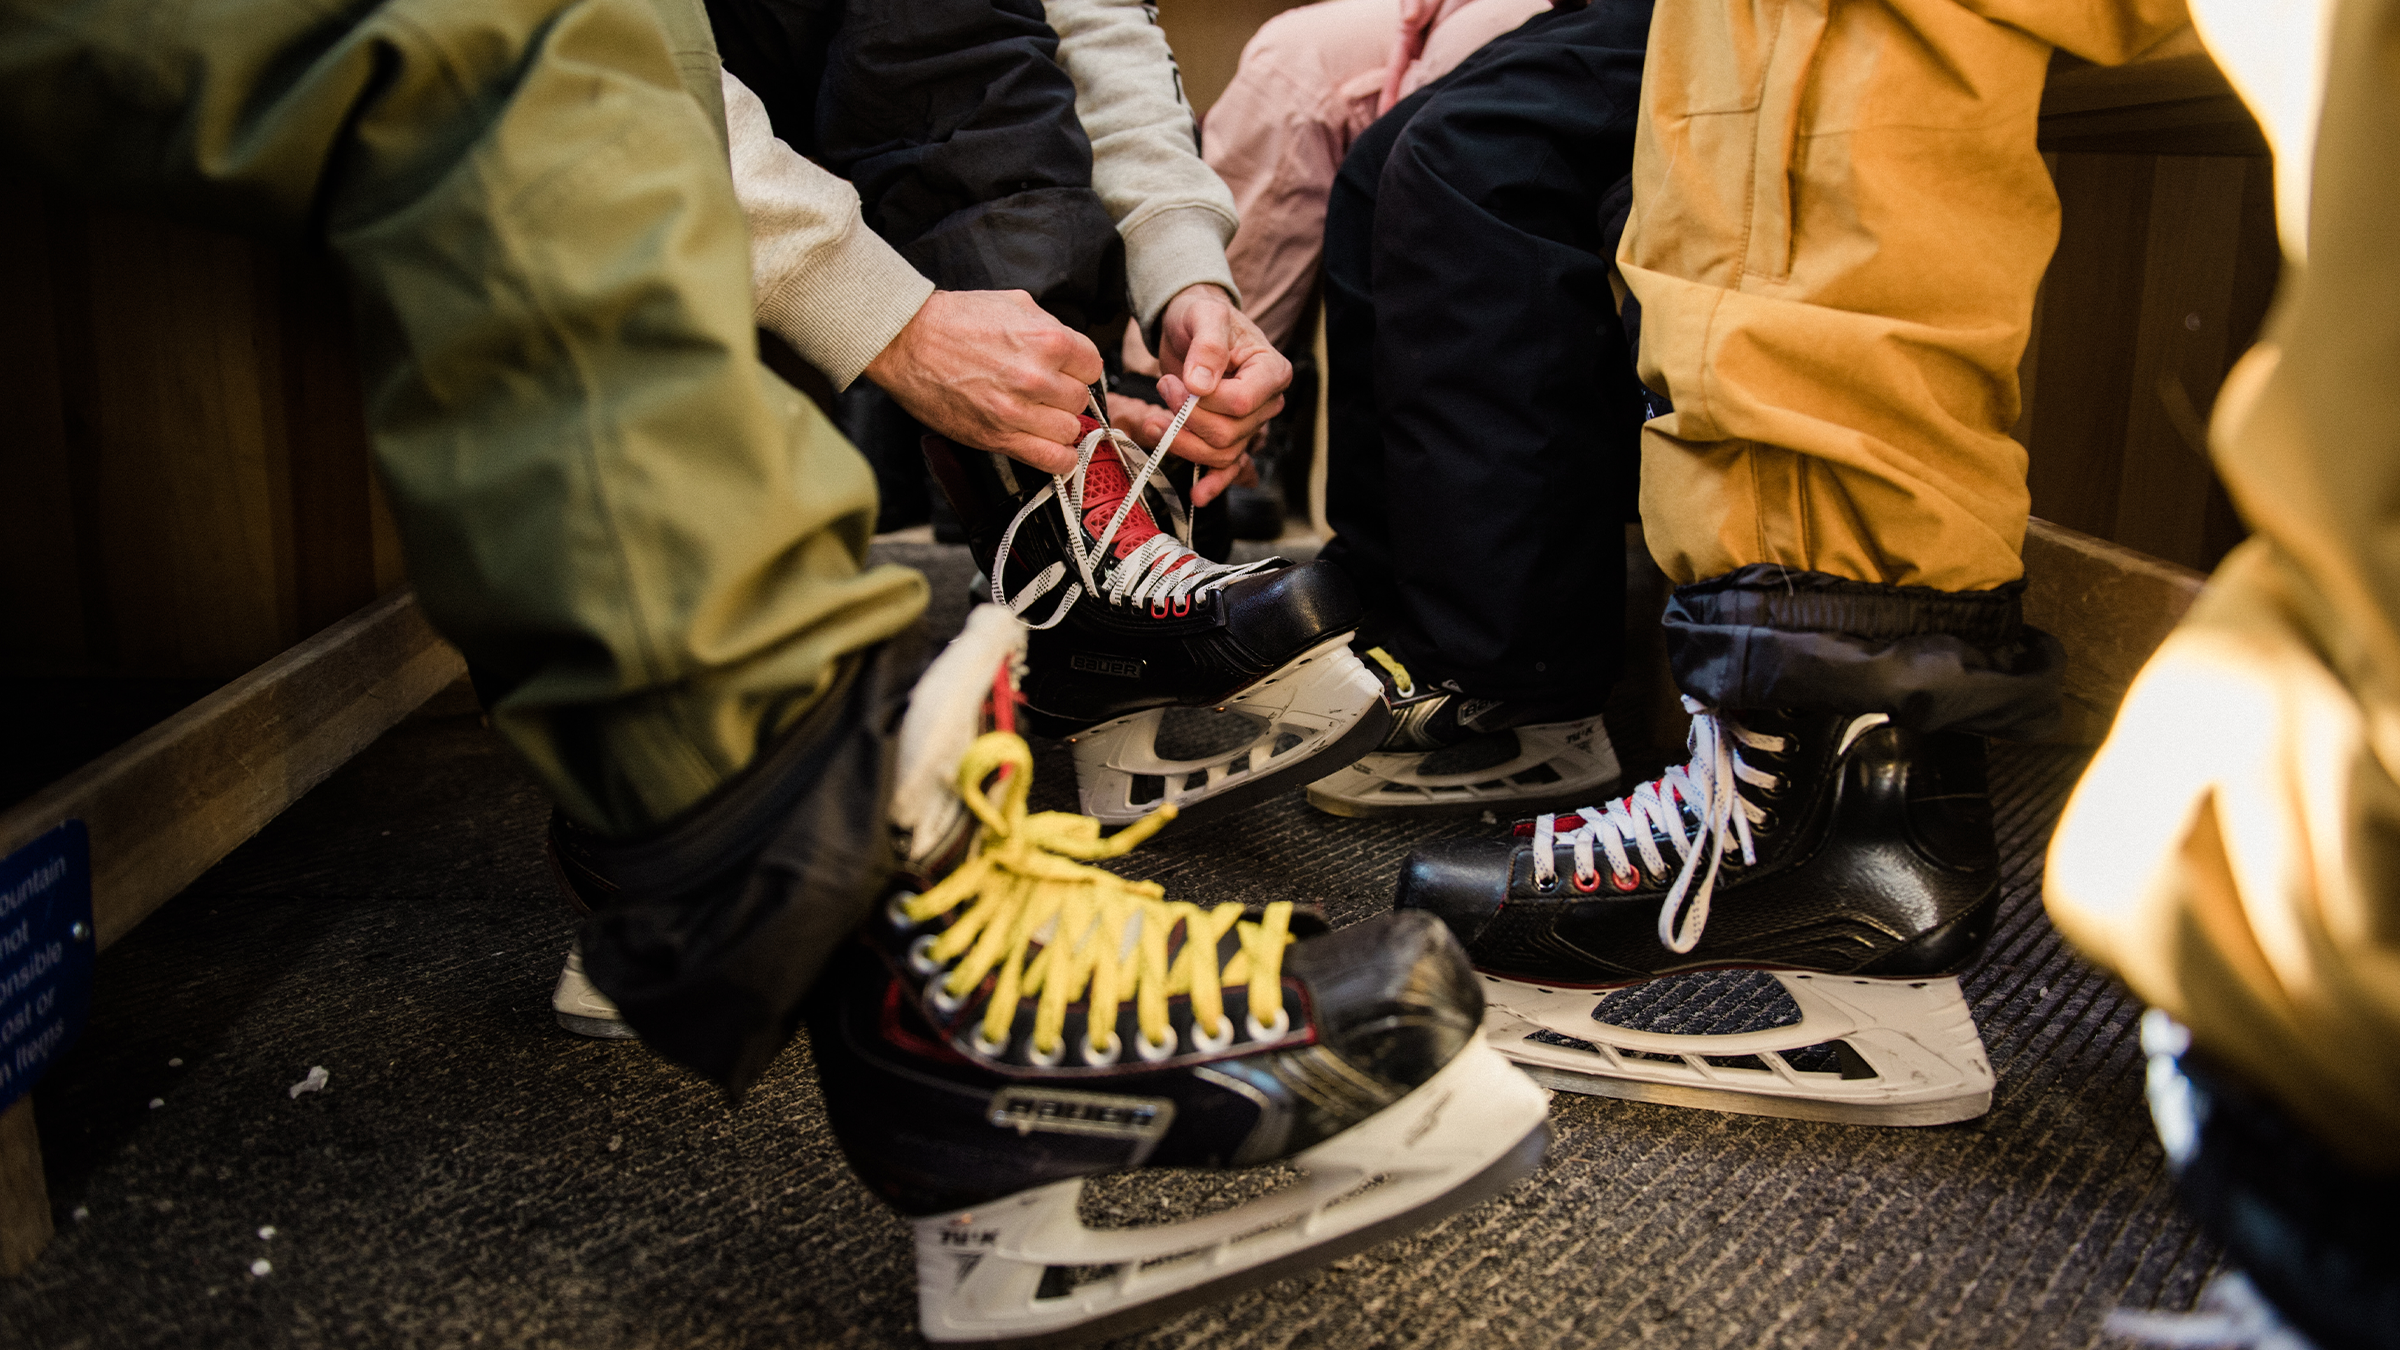 People tying up their skate rentals to go skating at Blue mountain